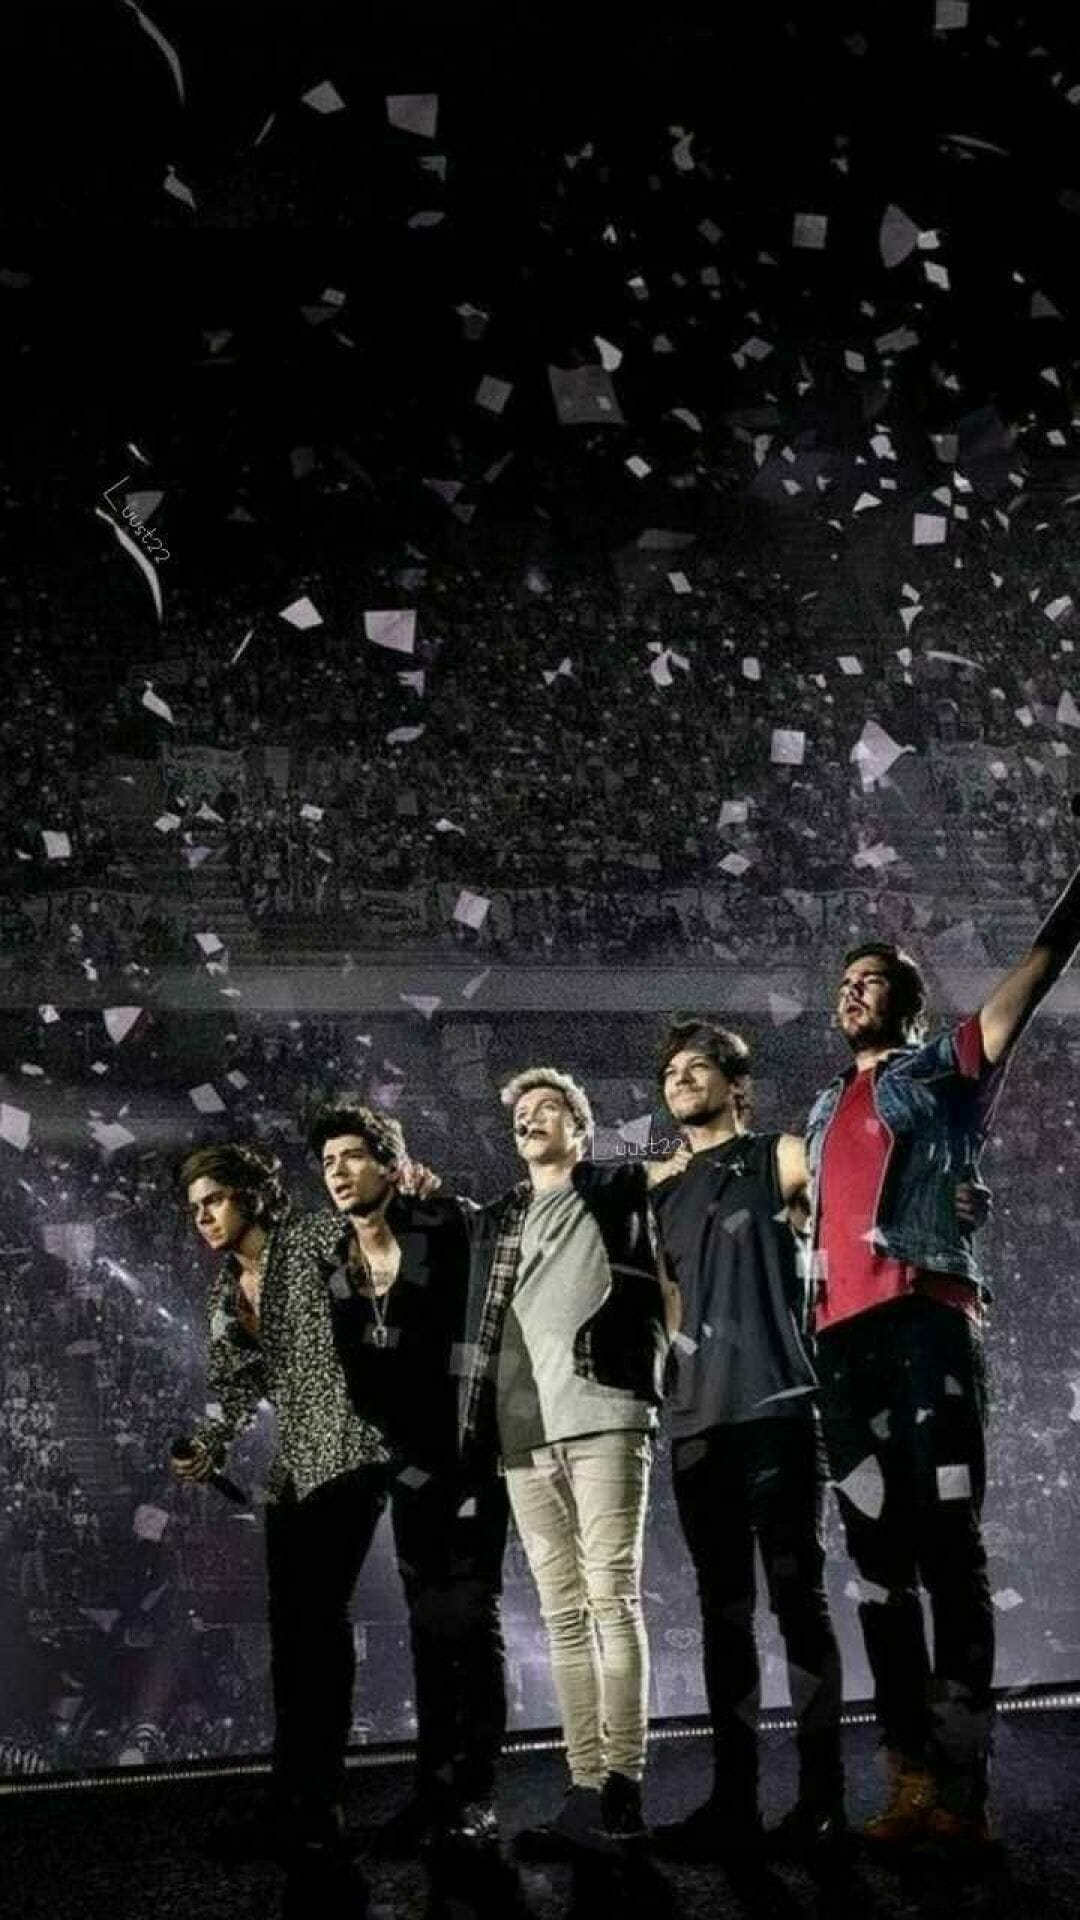 One Direction Wallpaper Free One Direction Background / iPhone HD Wallpaper Background Download HD Wallpaper (Desktop Background / Android / iPhone) (1080p, 4k) (1080x1920)